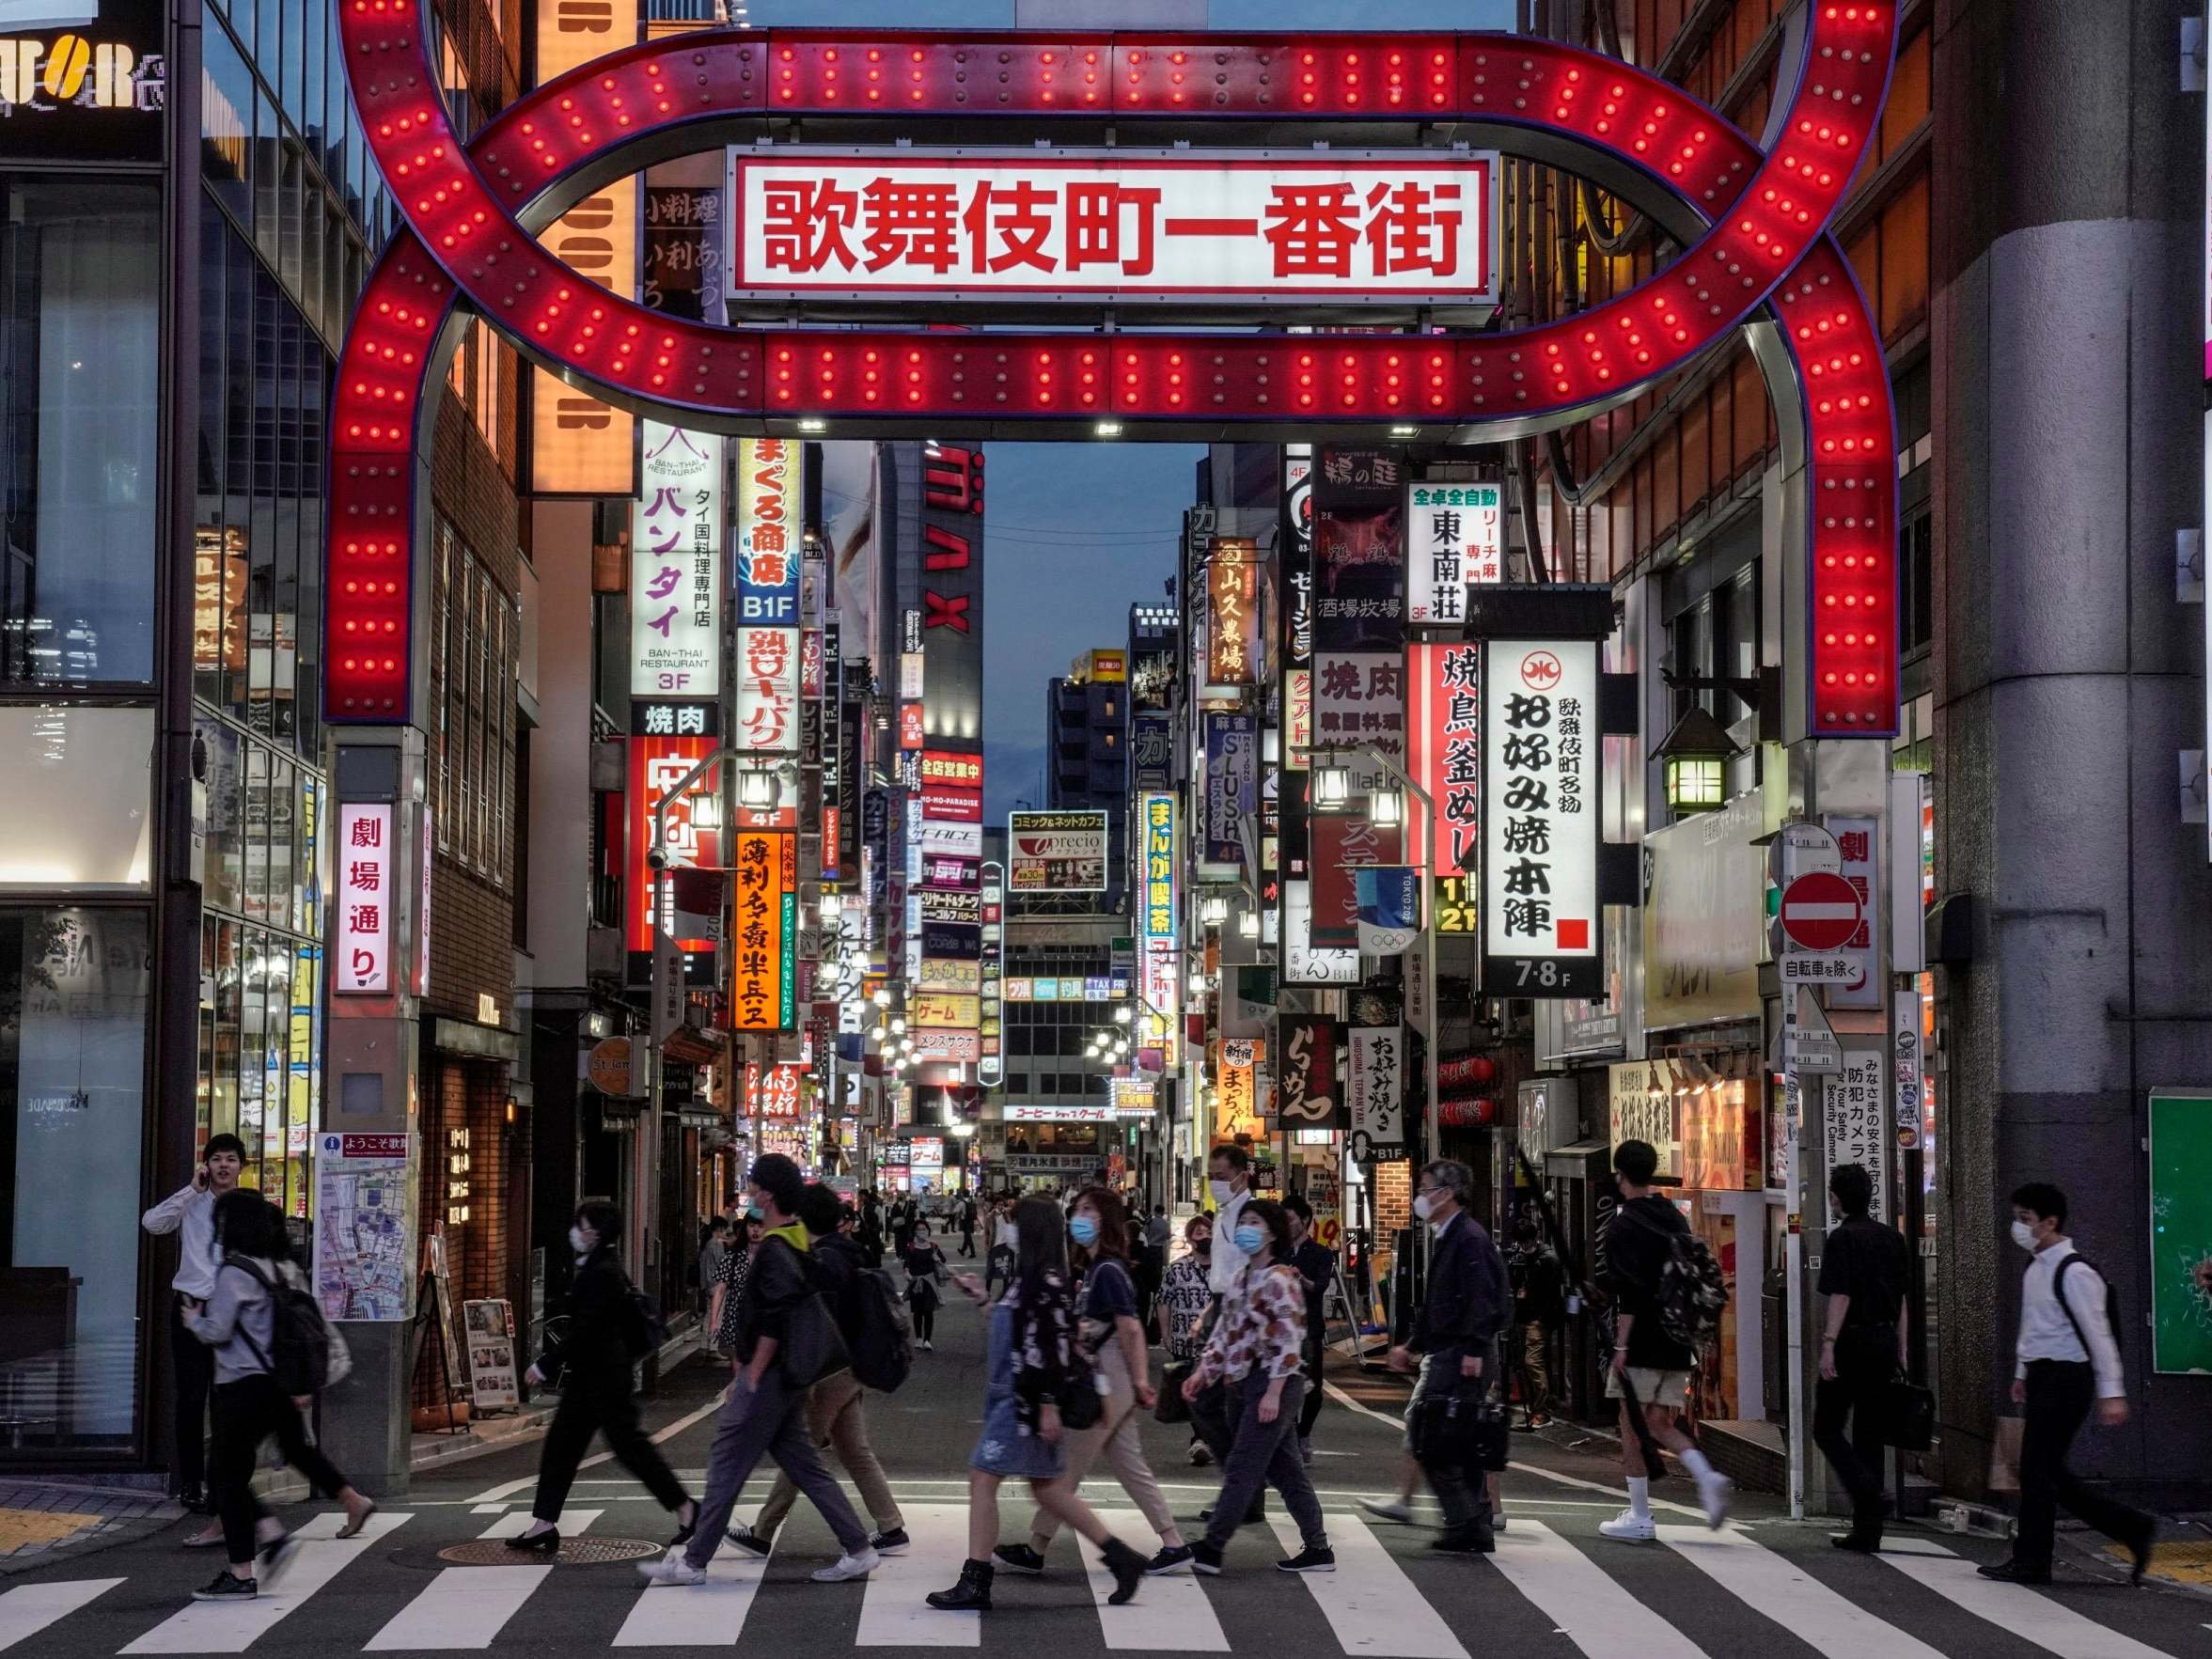 Commuters walk toward a railway station in front of an entrance to Kabukicho, Japan's biggest nightlife entertainment district at Shinjuku, in Tokyo, 25 May 2020.